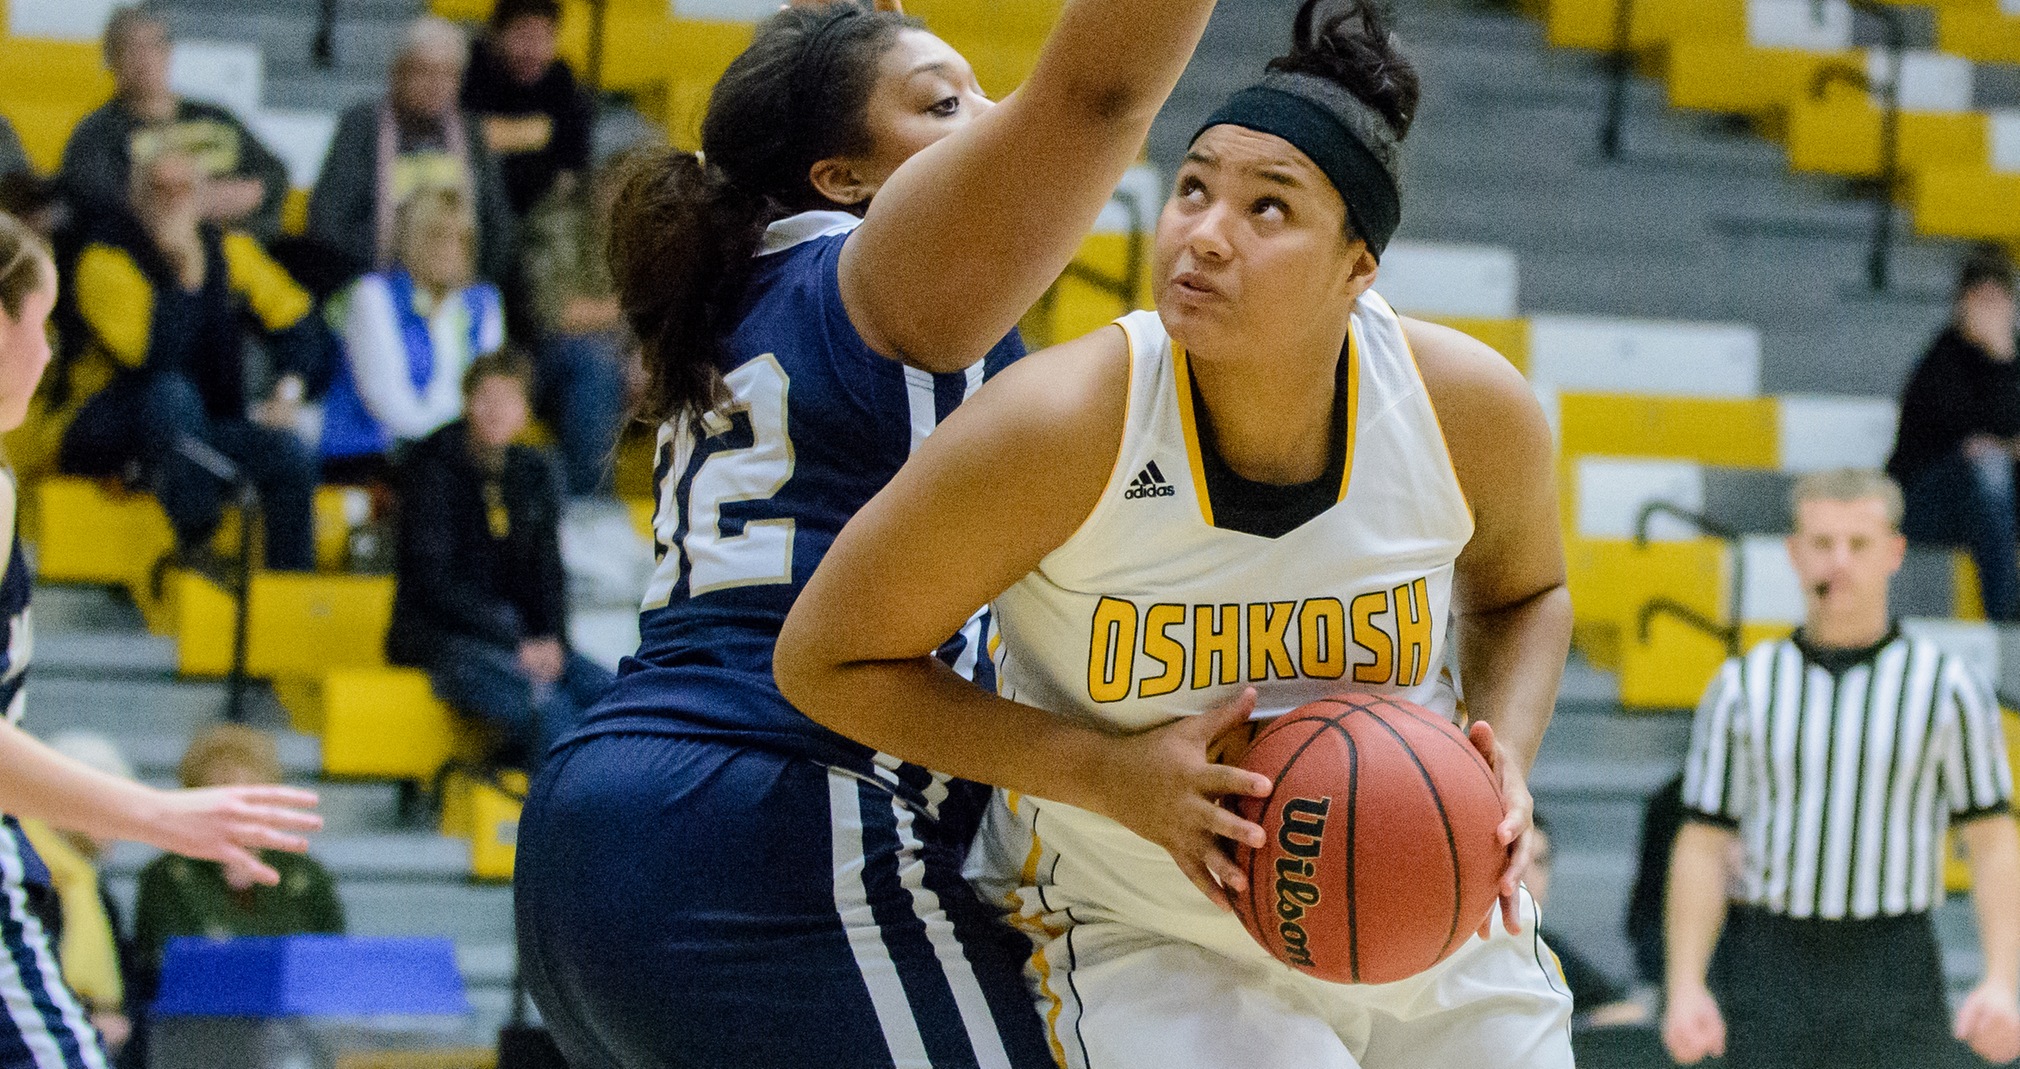 Isabella Samuels scored six of her eight points during the third quarter.